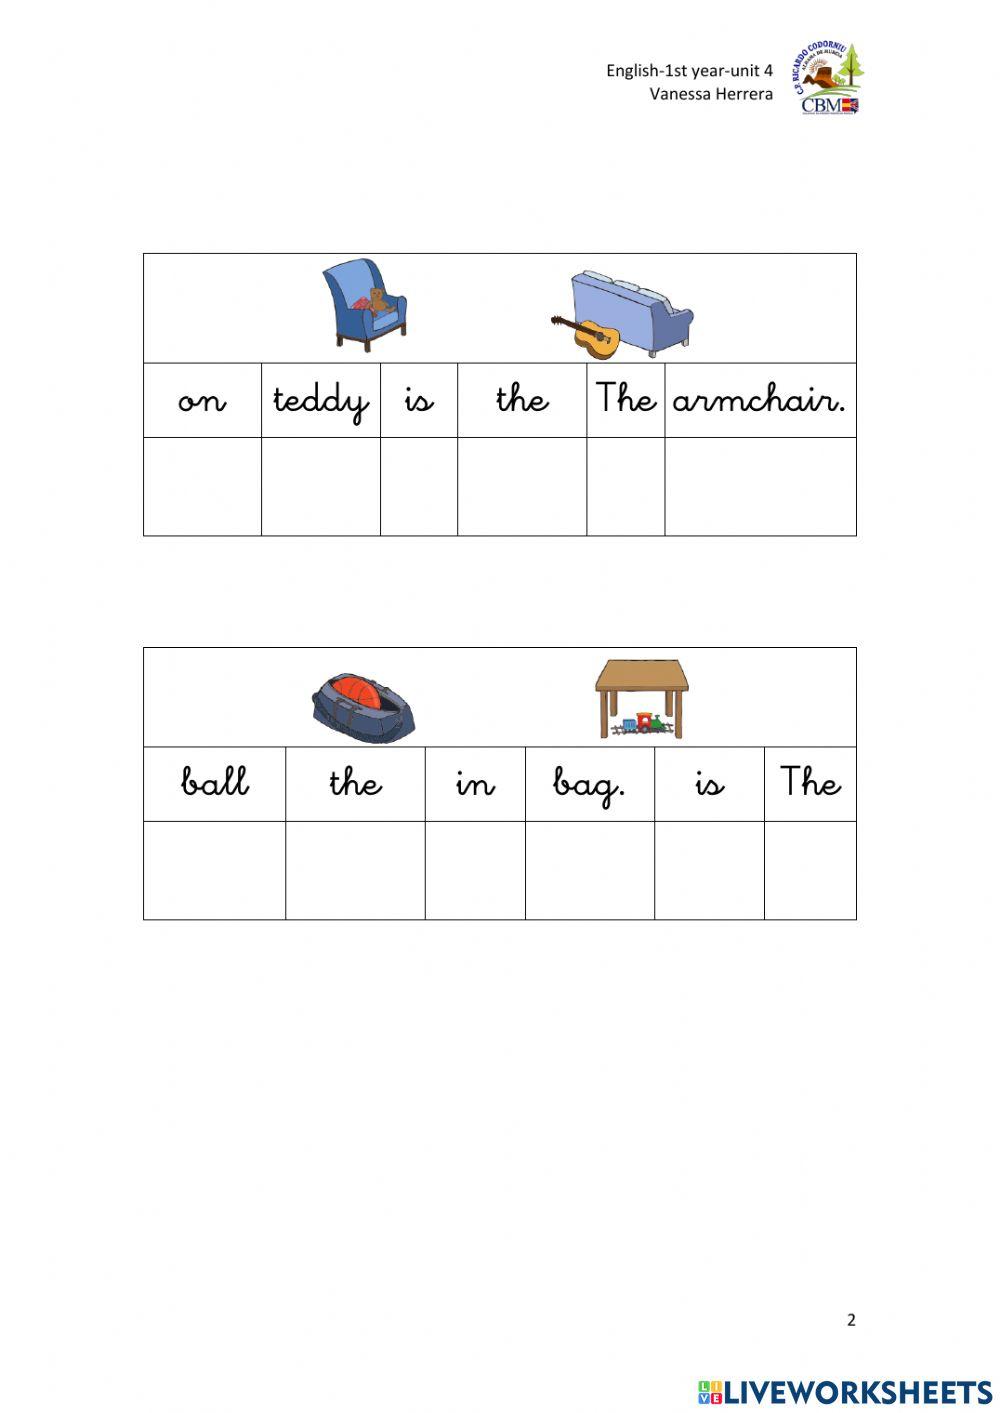 Read, order and circle. Prepositions of place and toys.